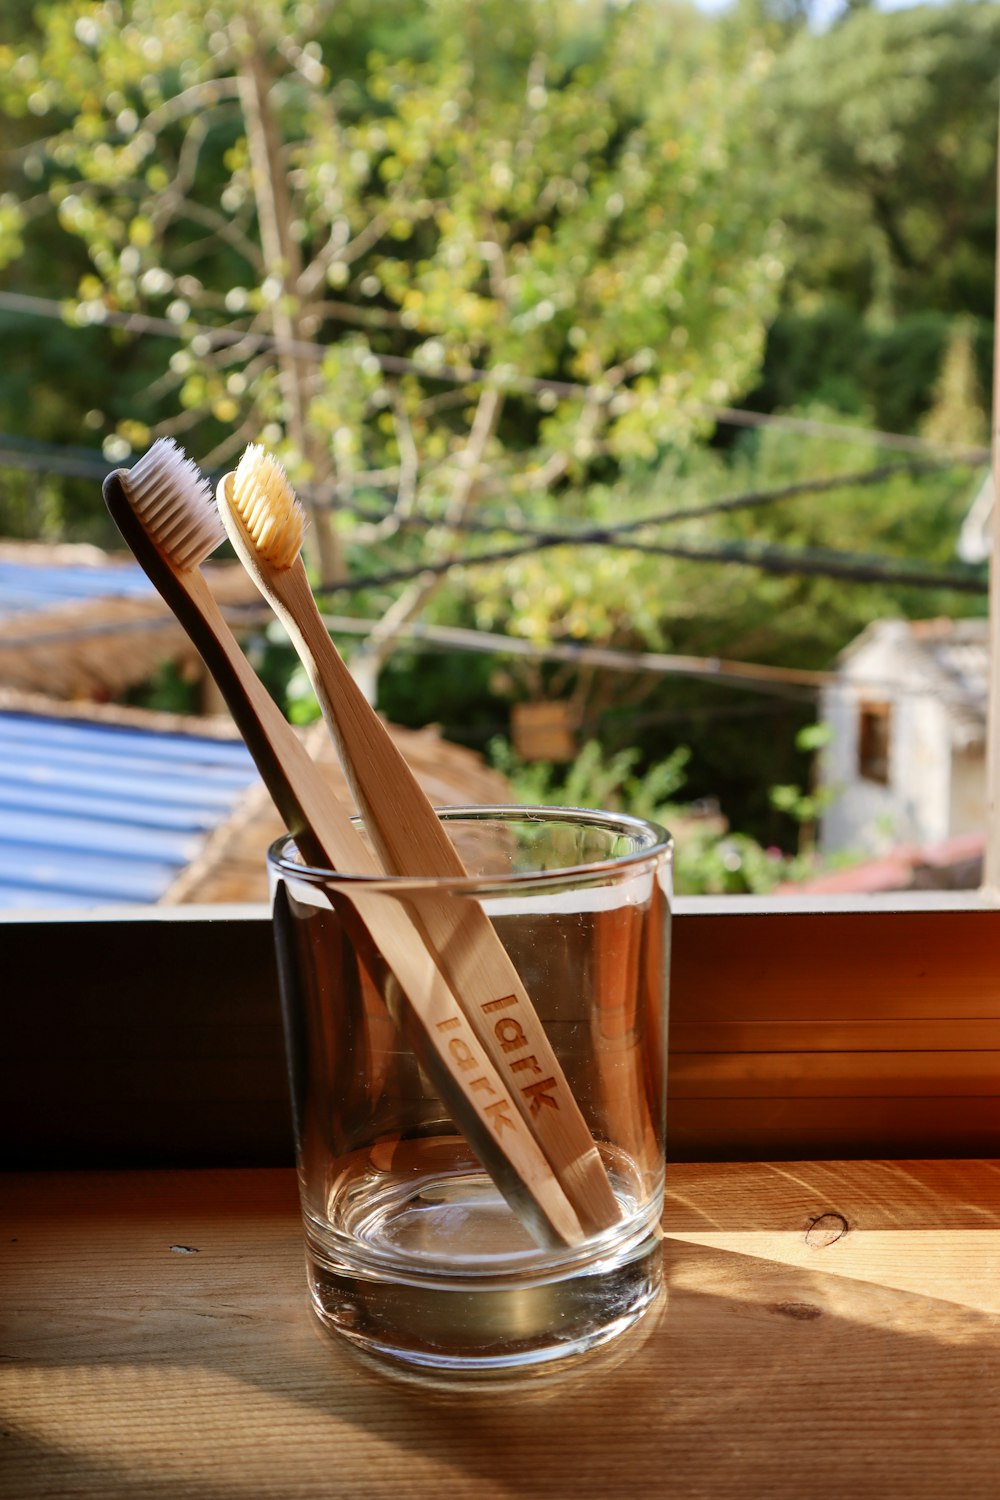 two wooden toothbrushes in a glass of water